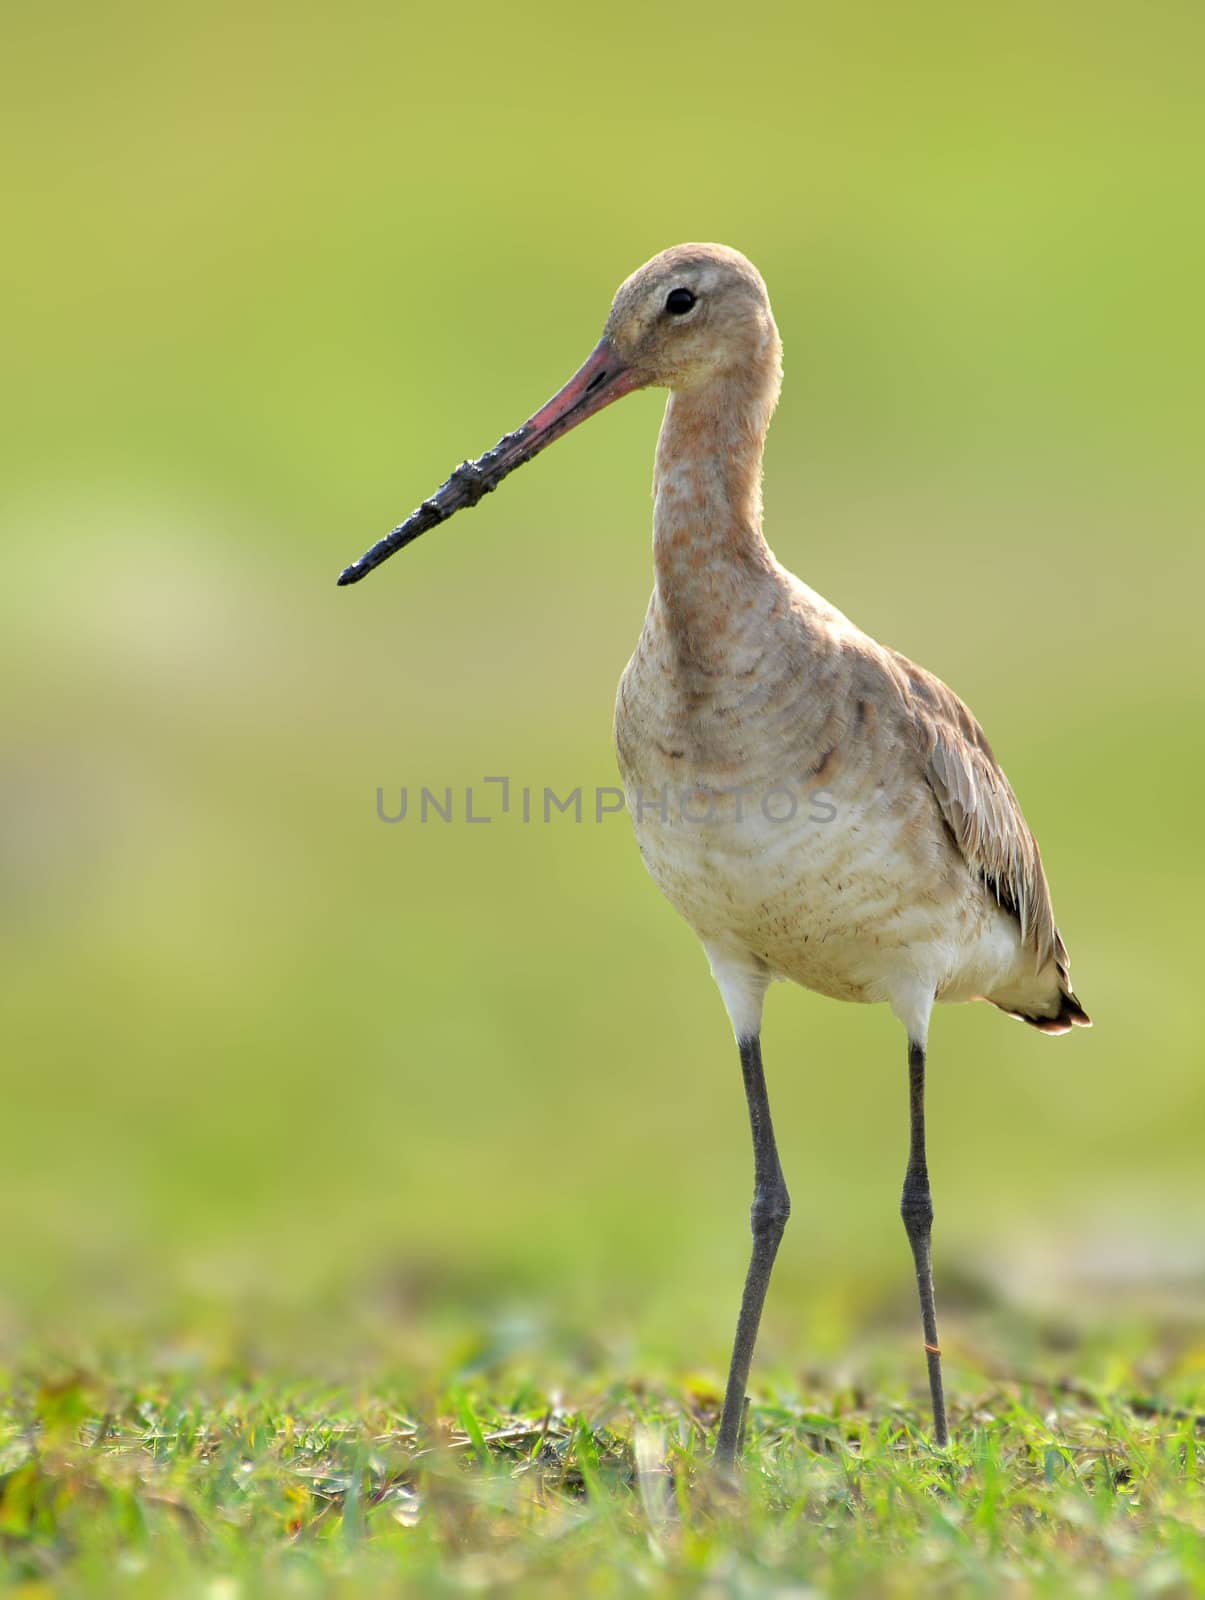 With its long beak, white-barred wings and namesake tail, the Black-Tailed Godwit is a distinctive and elegant bird.